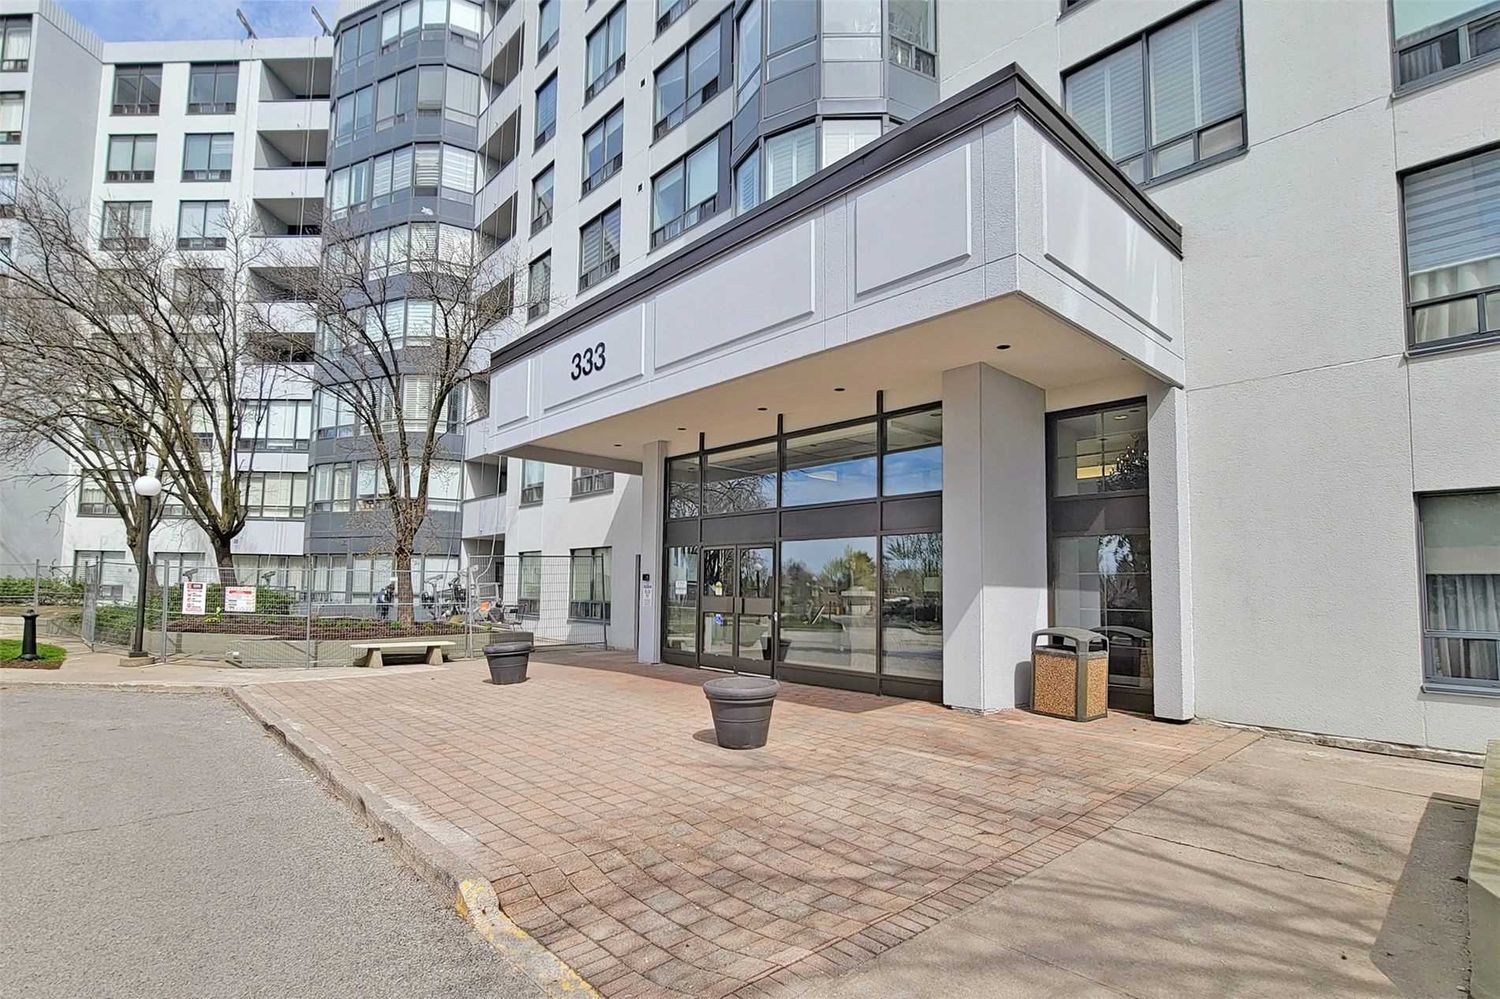 333 Clark Avenue W. The Conservatory Condos is located in  Vaughan, Toronto - image #2 of 3